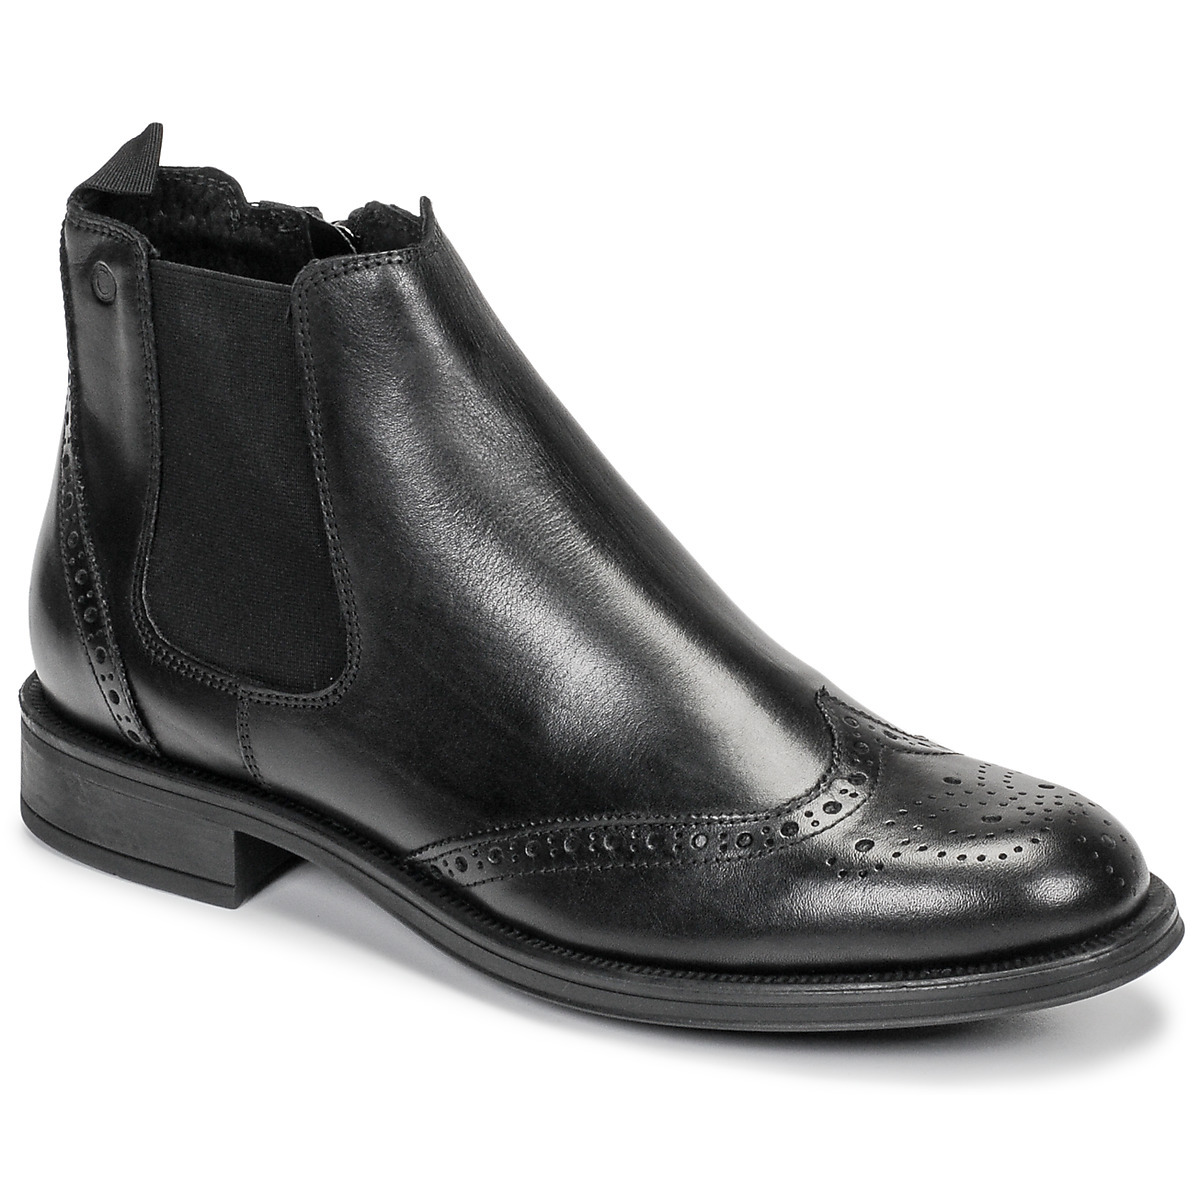 Spartoo Boots Black for Men from Carlington GOOFASH